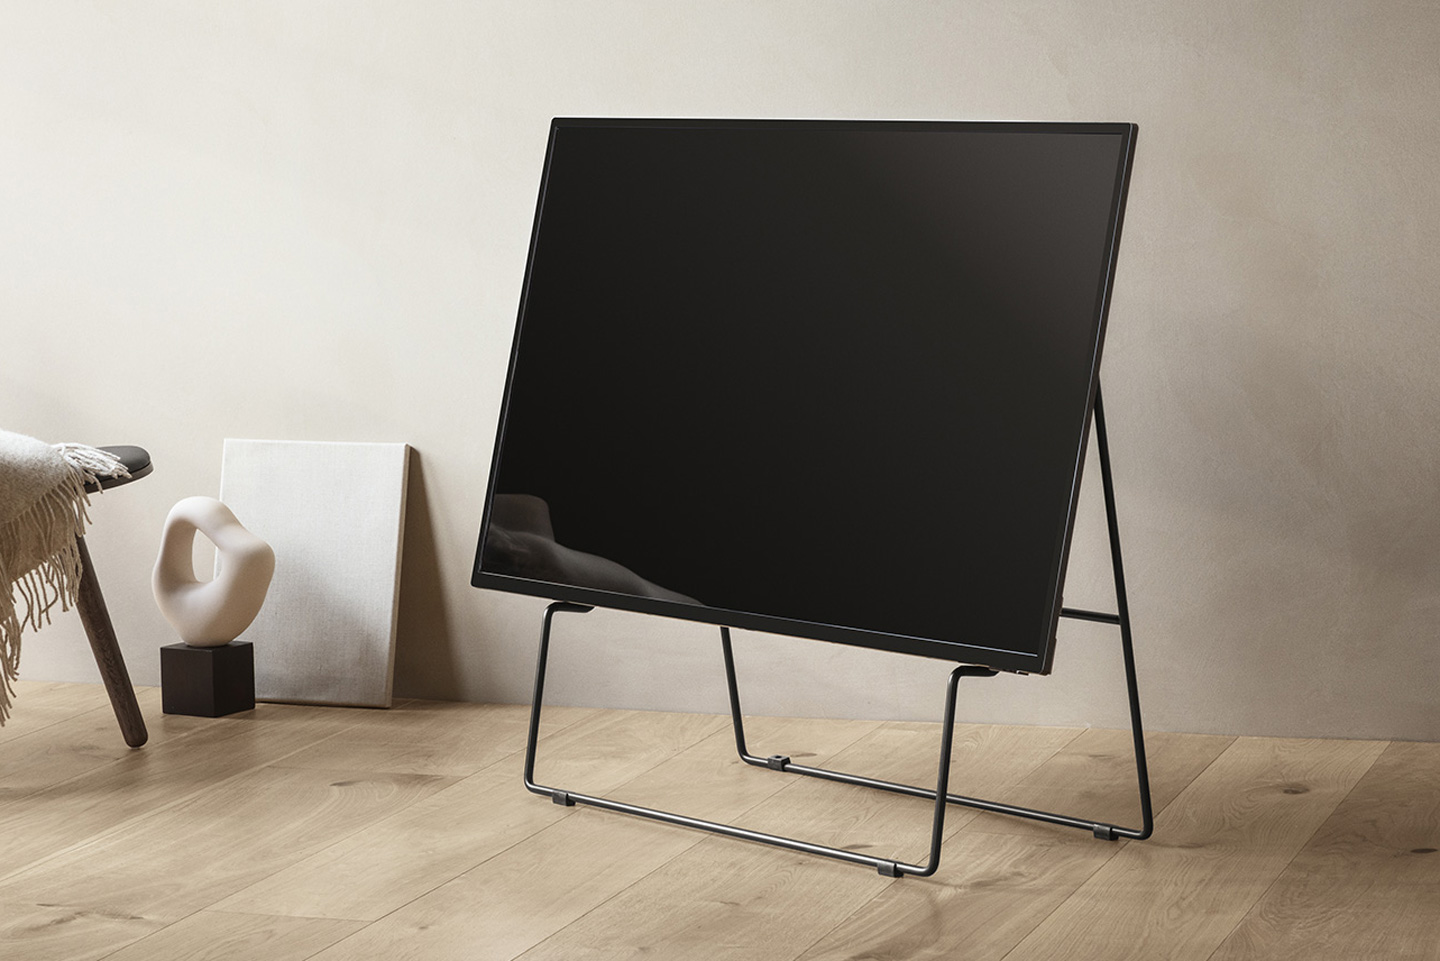 Award Winning Minimal Tv Stand Uses An Easel Style Design To Prop Your